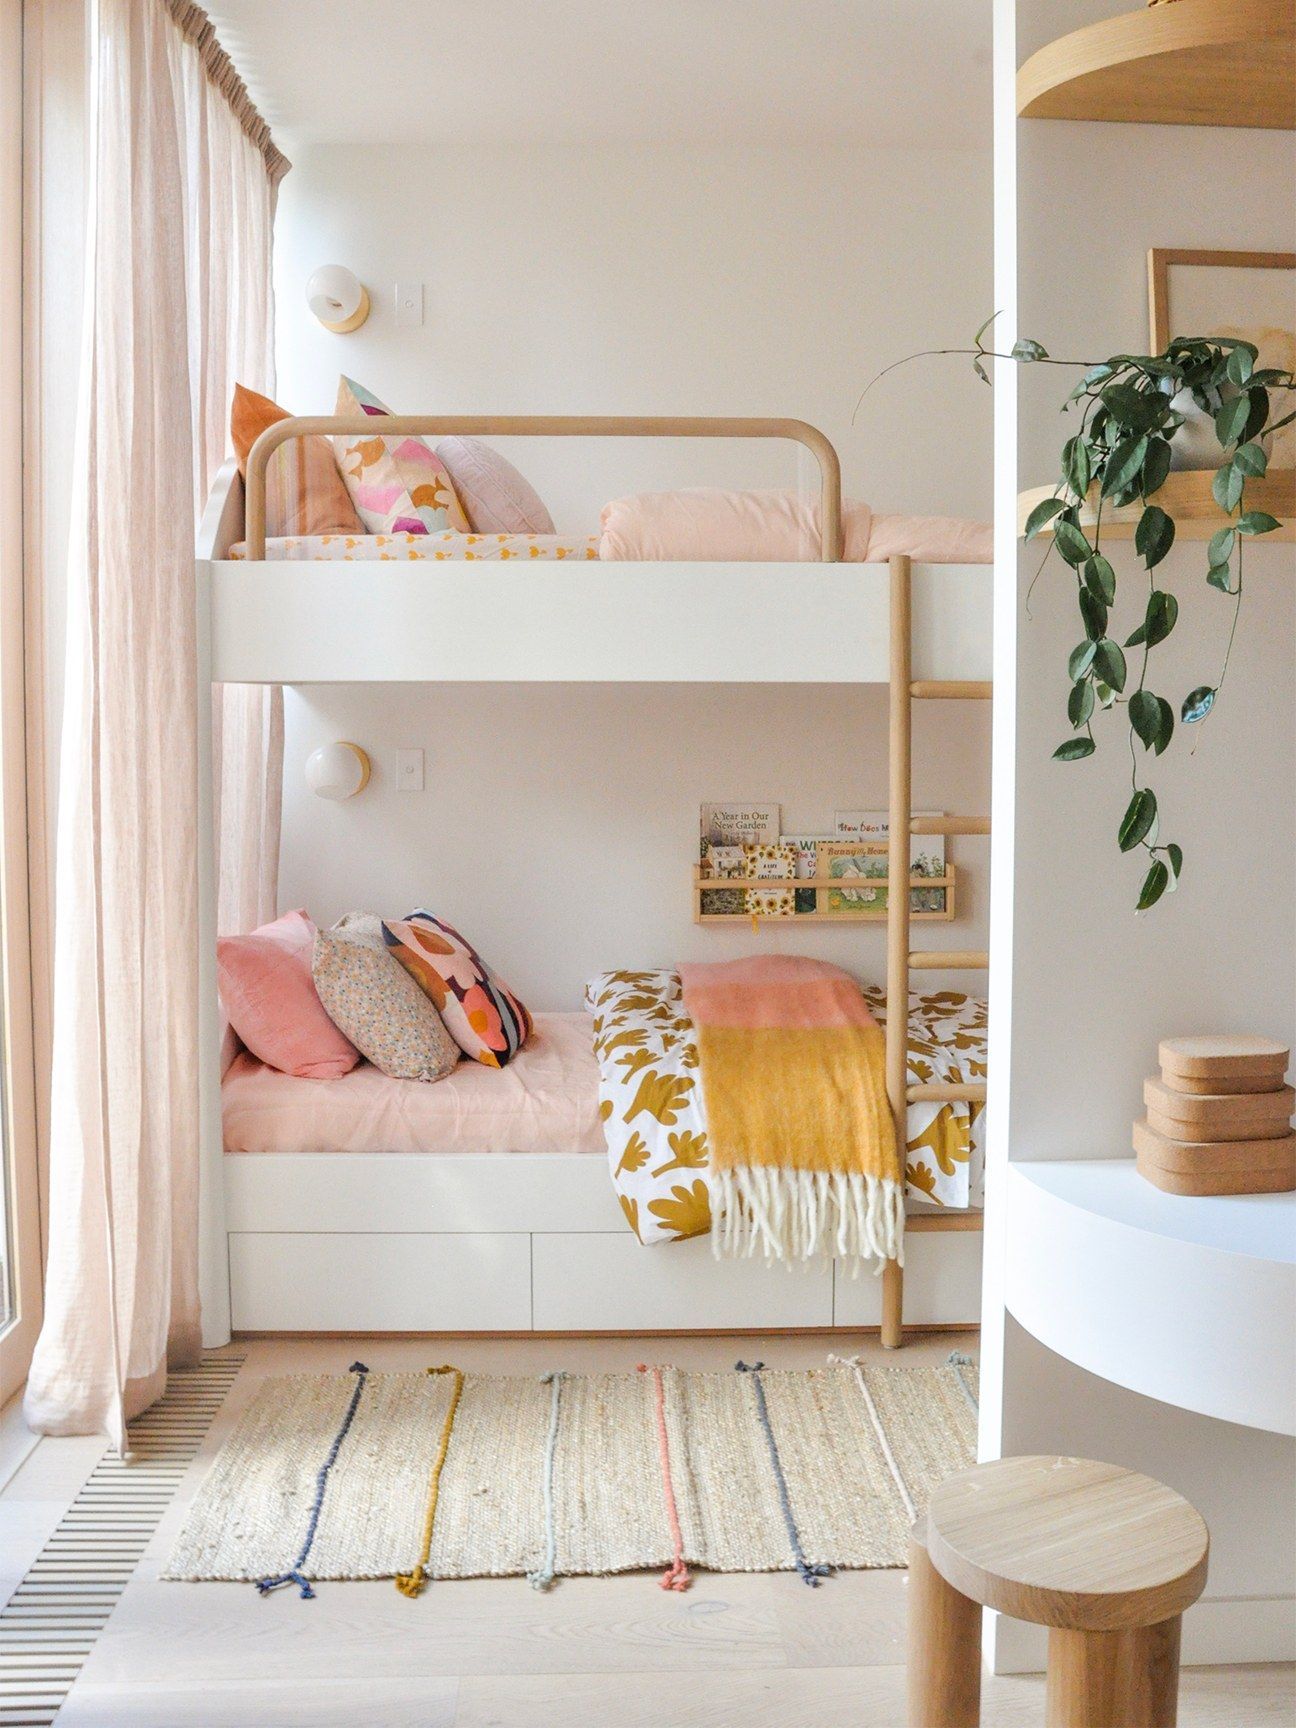 8 Bunk Bed Ideas, Because Your Kids' Nursery Deserves Better - 8 Bunk Bed Ideas, Because Your Kids' Nursery Deserves Better -   18 diy Kids bedroom ideas